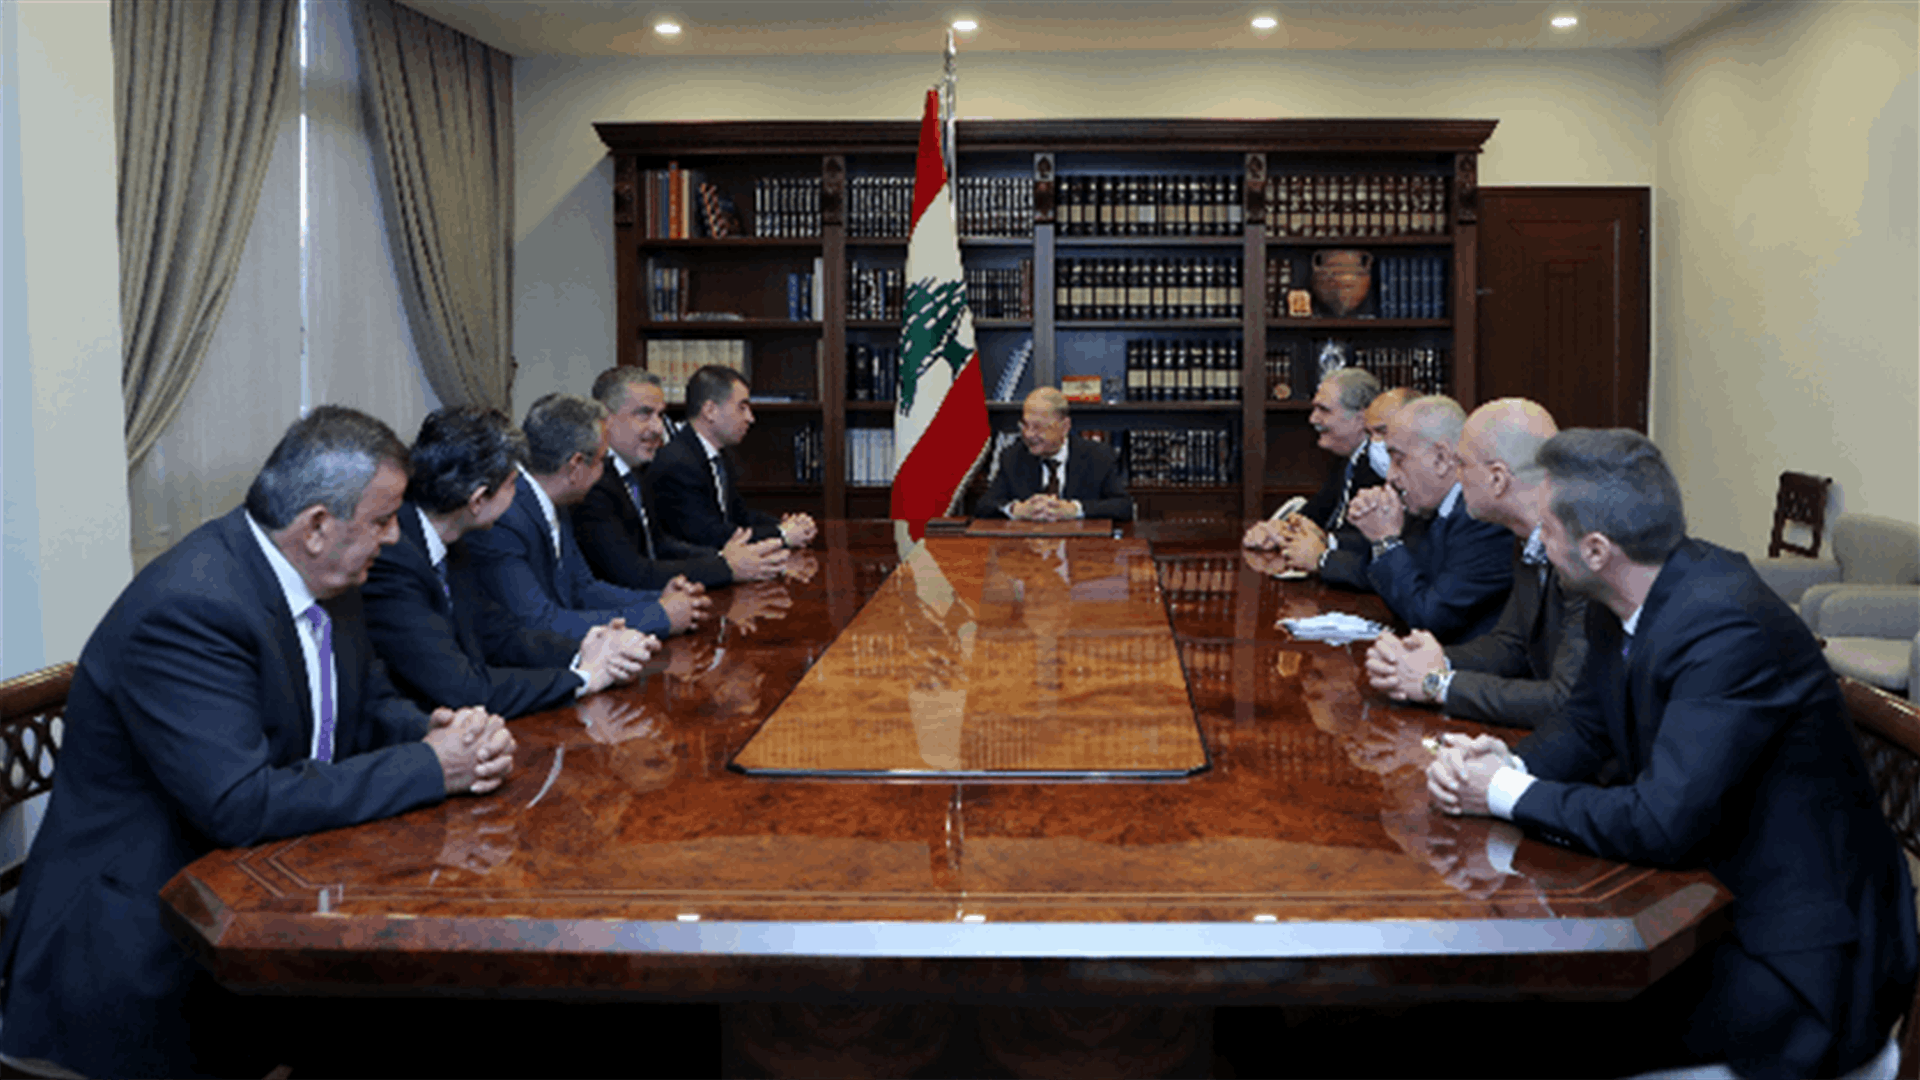 President Aoun: It is high time for full truth to be known about circumstances of catastrophic Beirut Port explosion